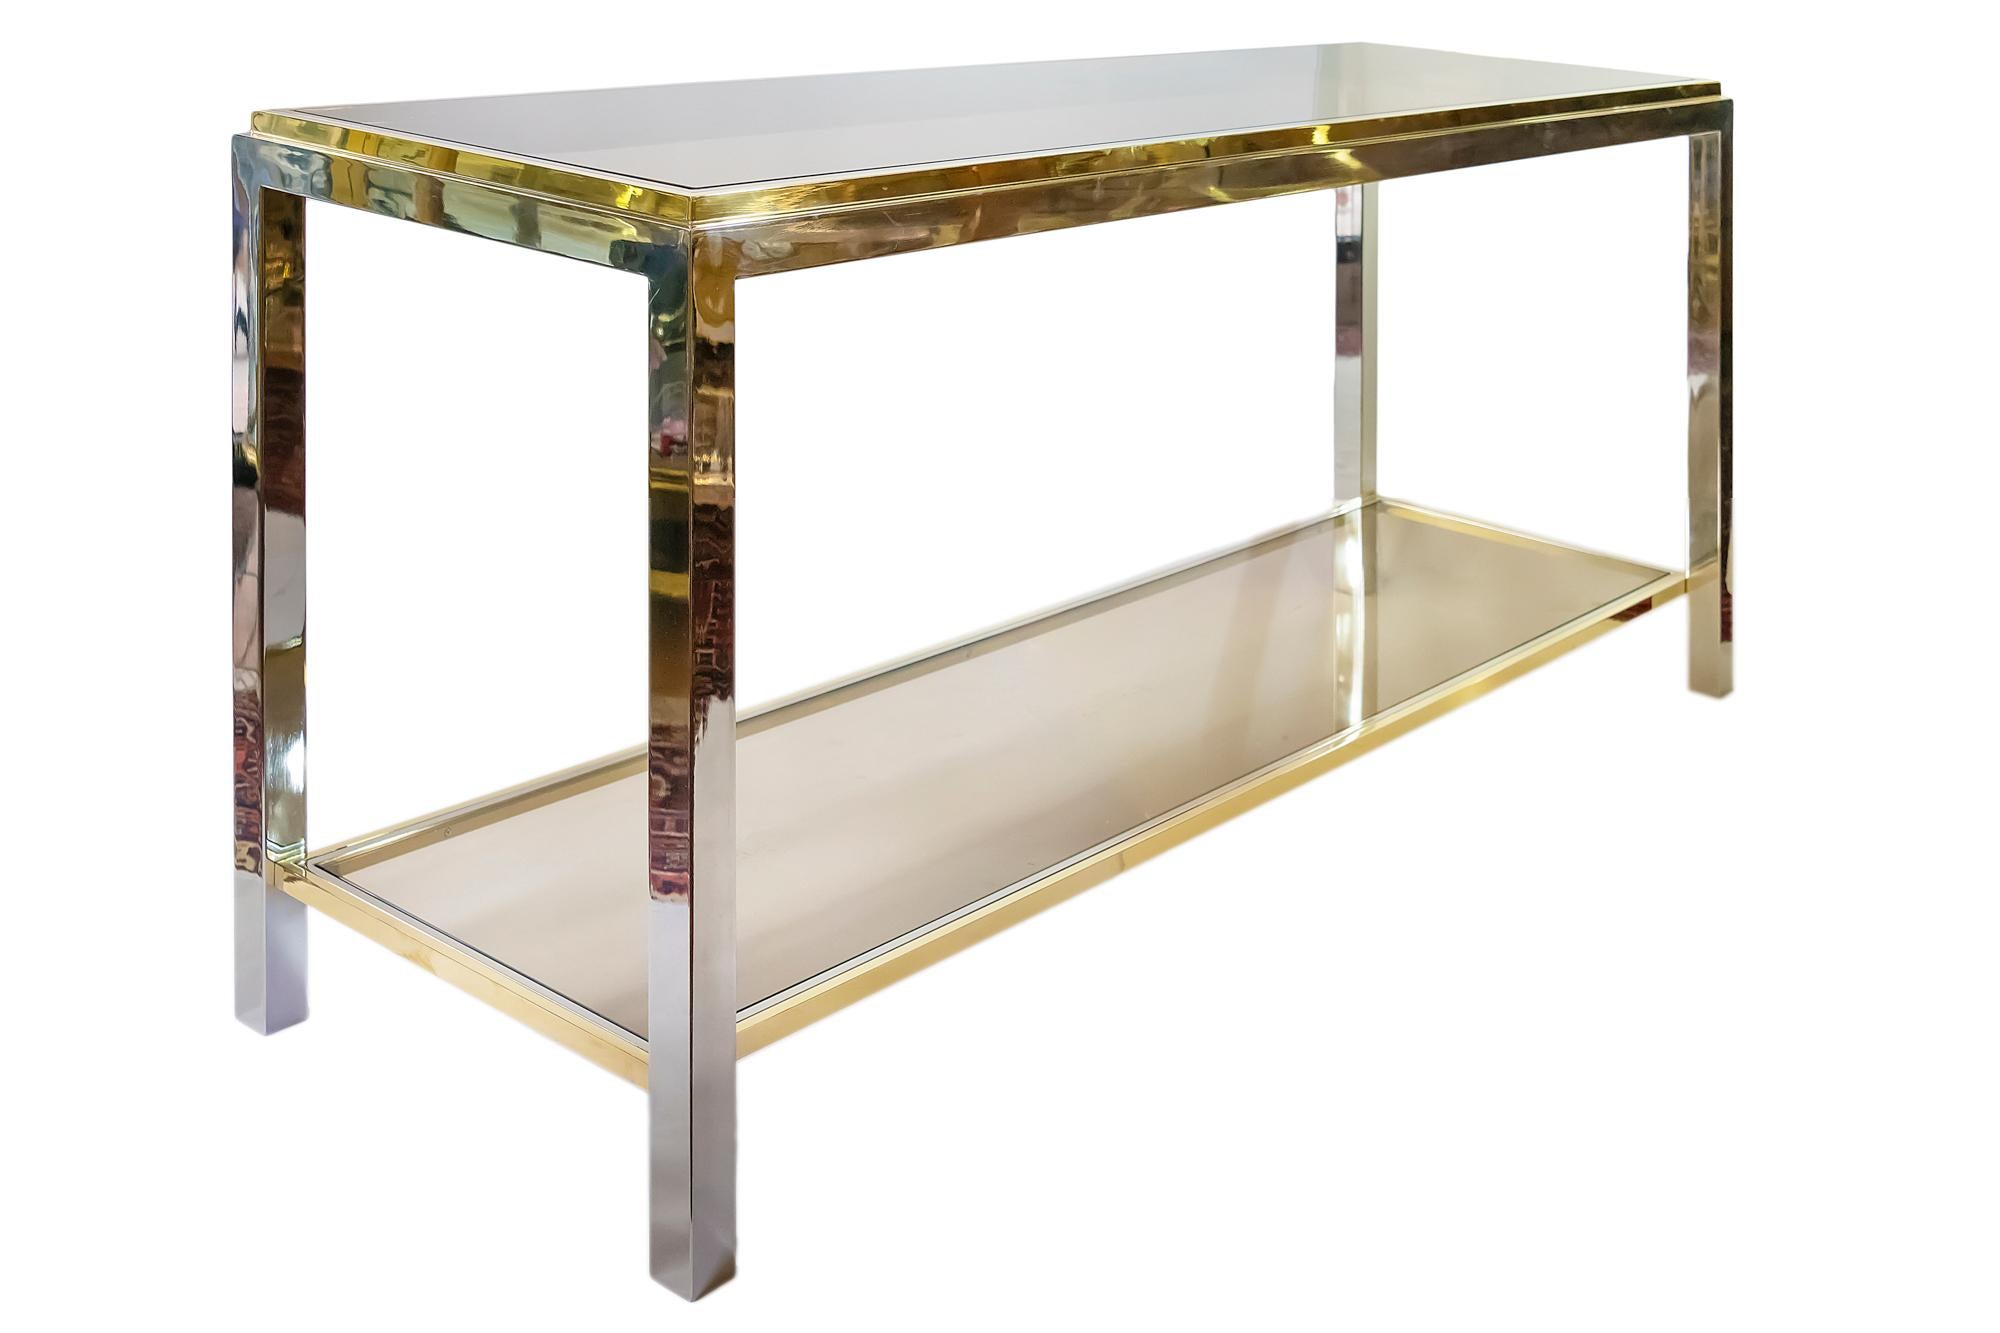 French Midcentury Brass, Chrome and Glass Console Table, by Jean Charles